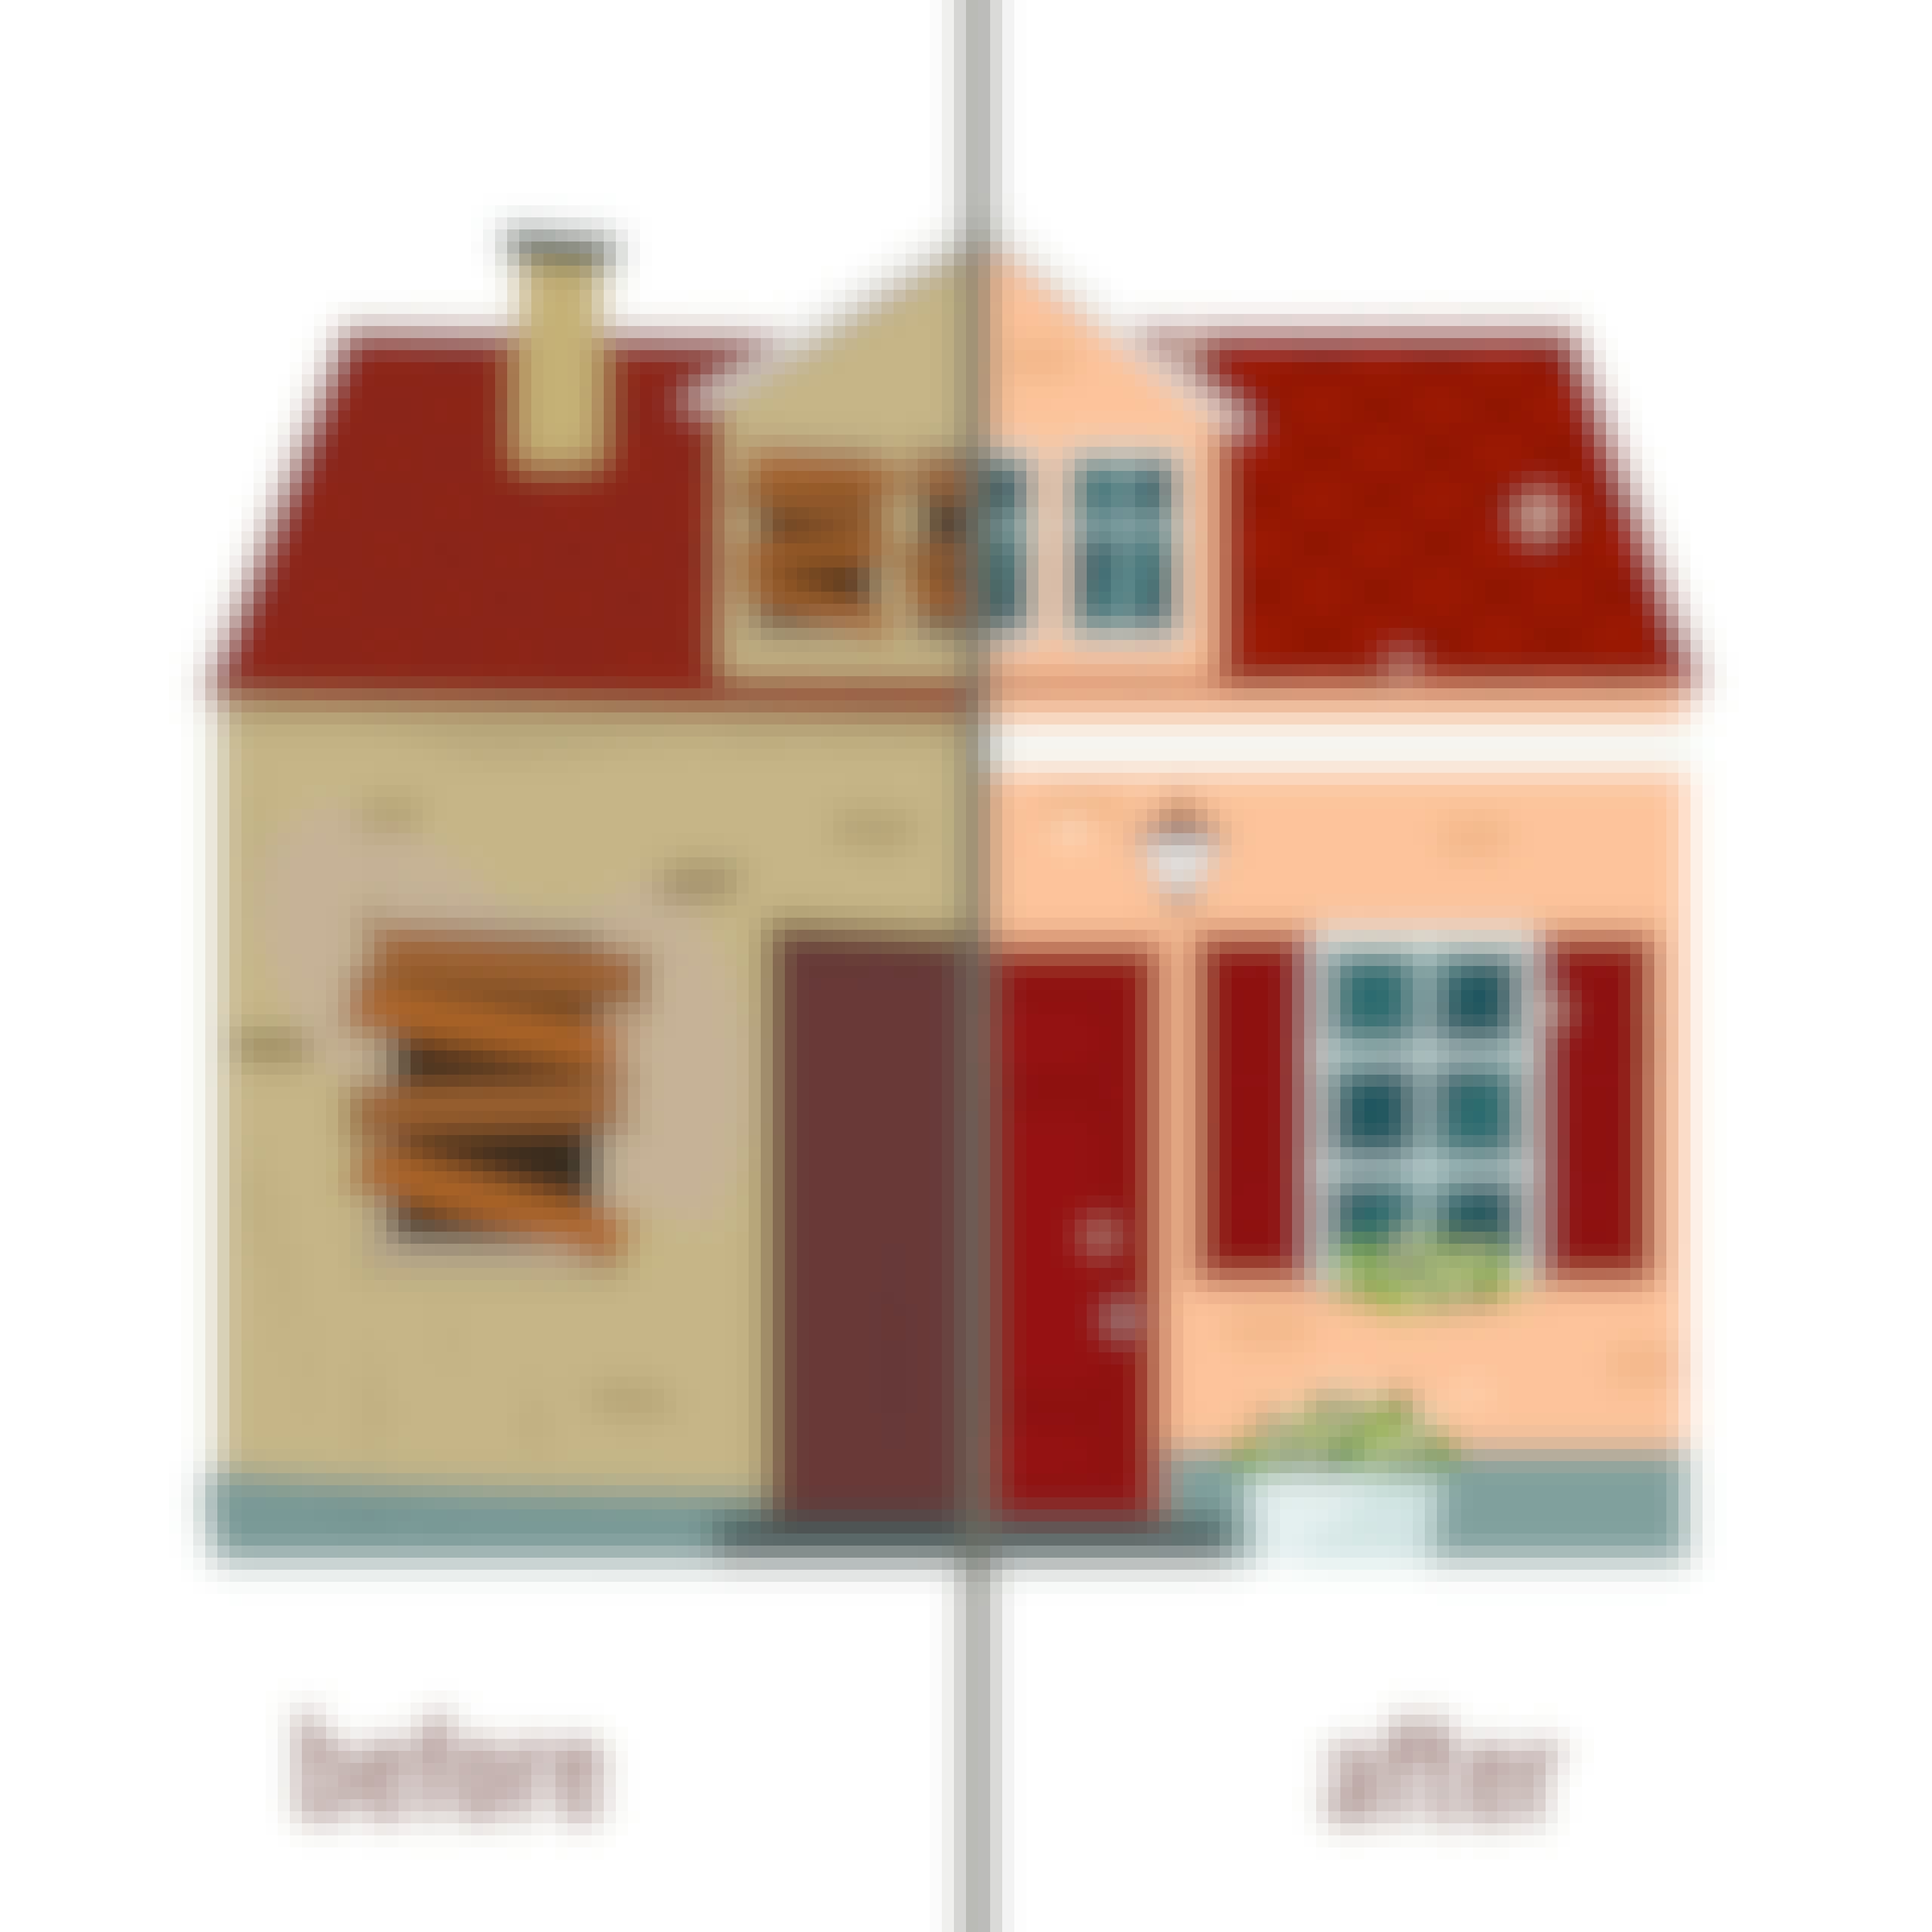 House before and after repair vector illustration. Flat design.